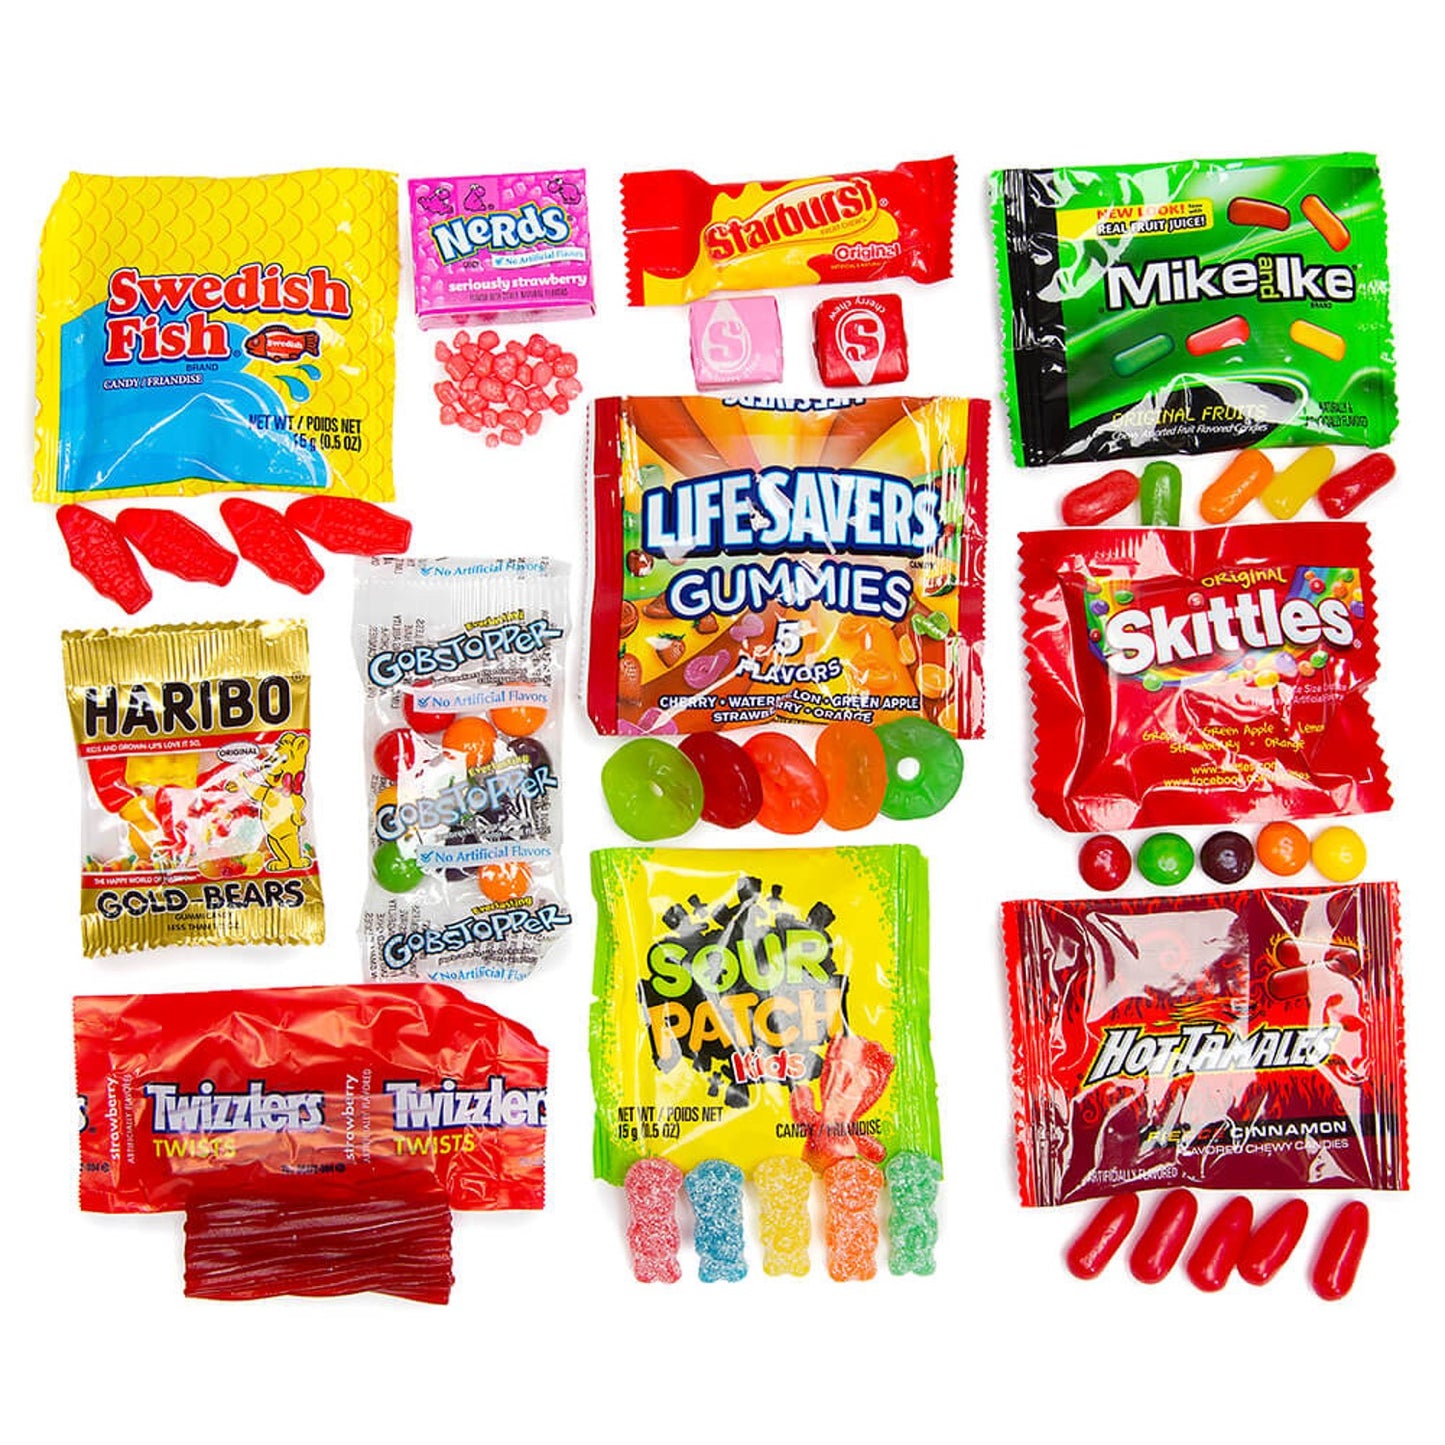 Funhouse Candy Variety Twizzlers Starburst Sour Patch Kids Halloween Treats 92oz